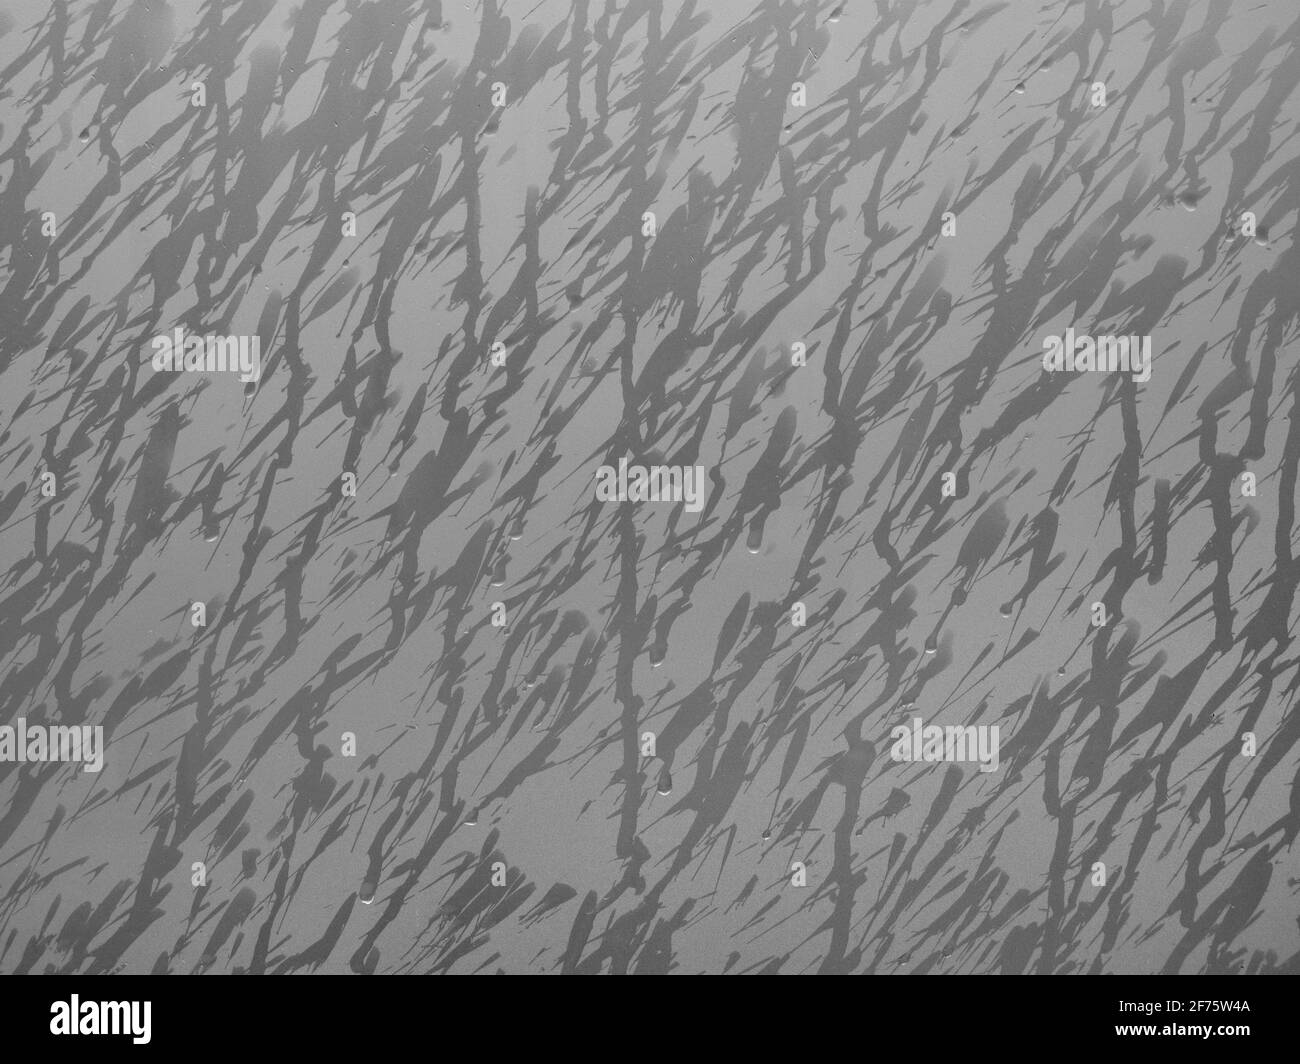 Many rain drops falling on frosted glass forming traces. Full frame background. Stock Photo